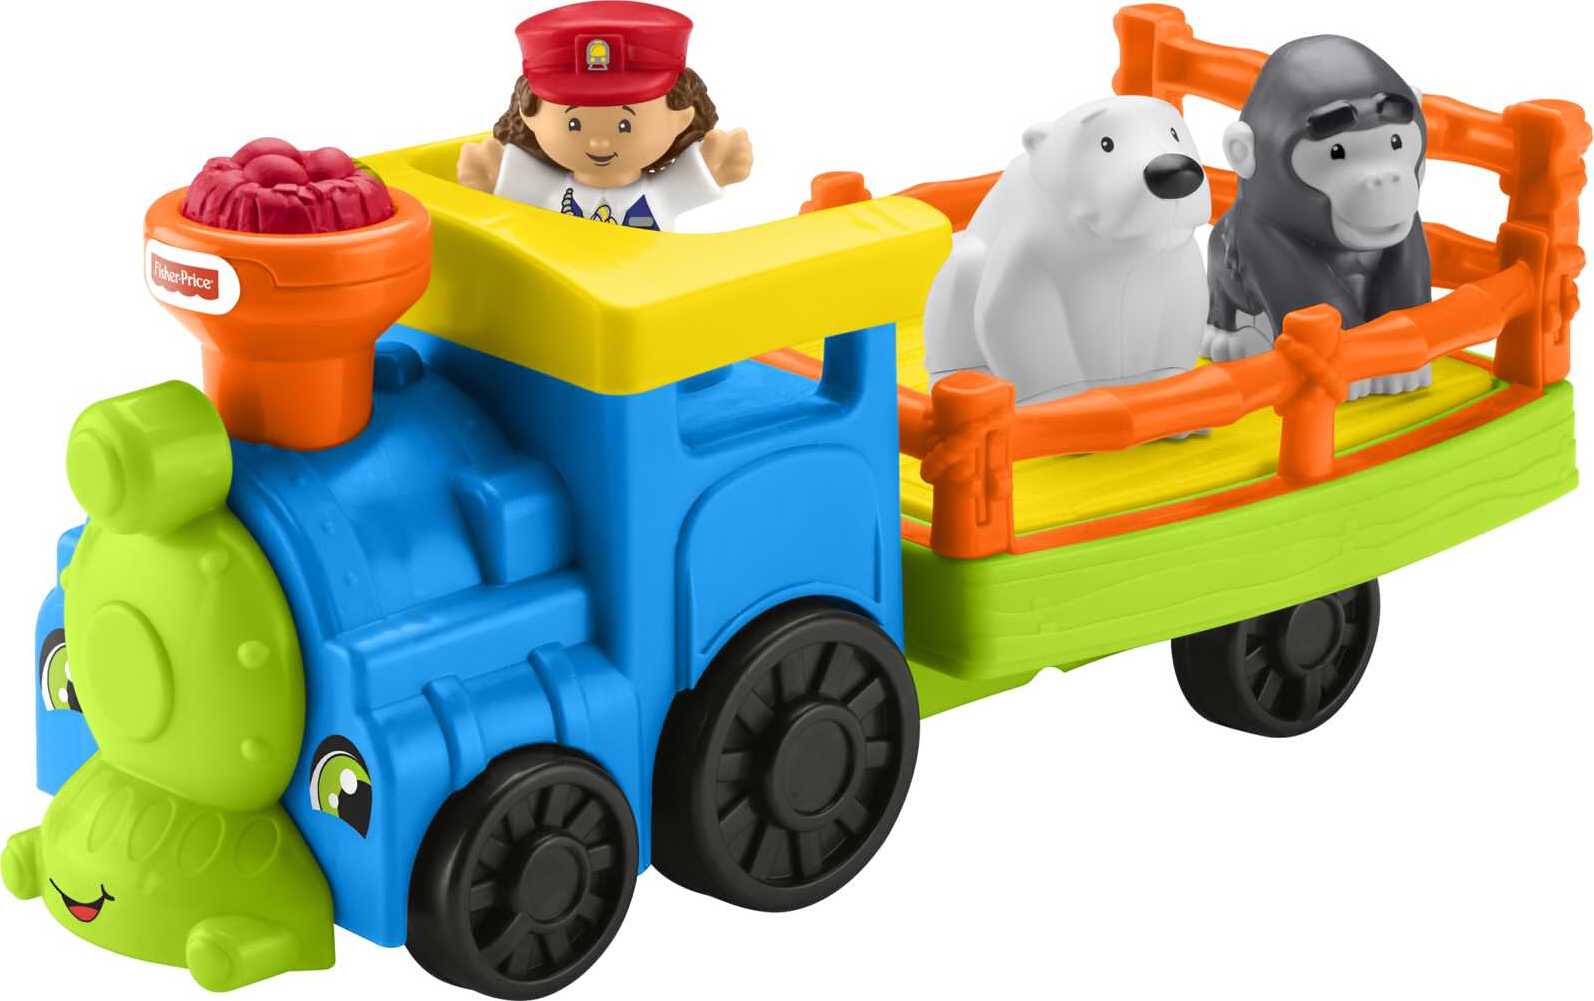 Fisher-Price Little People Choo-Choo Zoo Train with Music and Sounds for Toddlers, 3 Figures - image 1 of 7